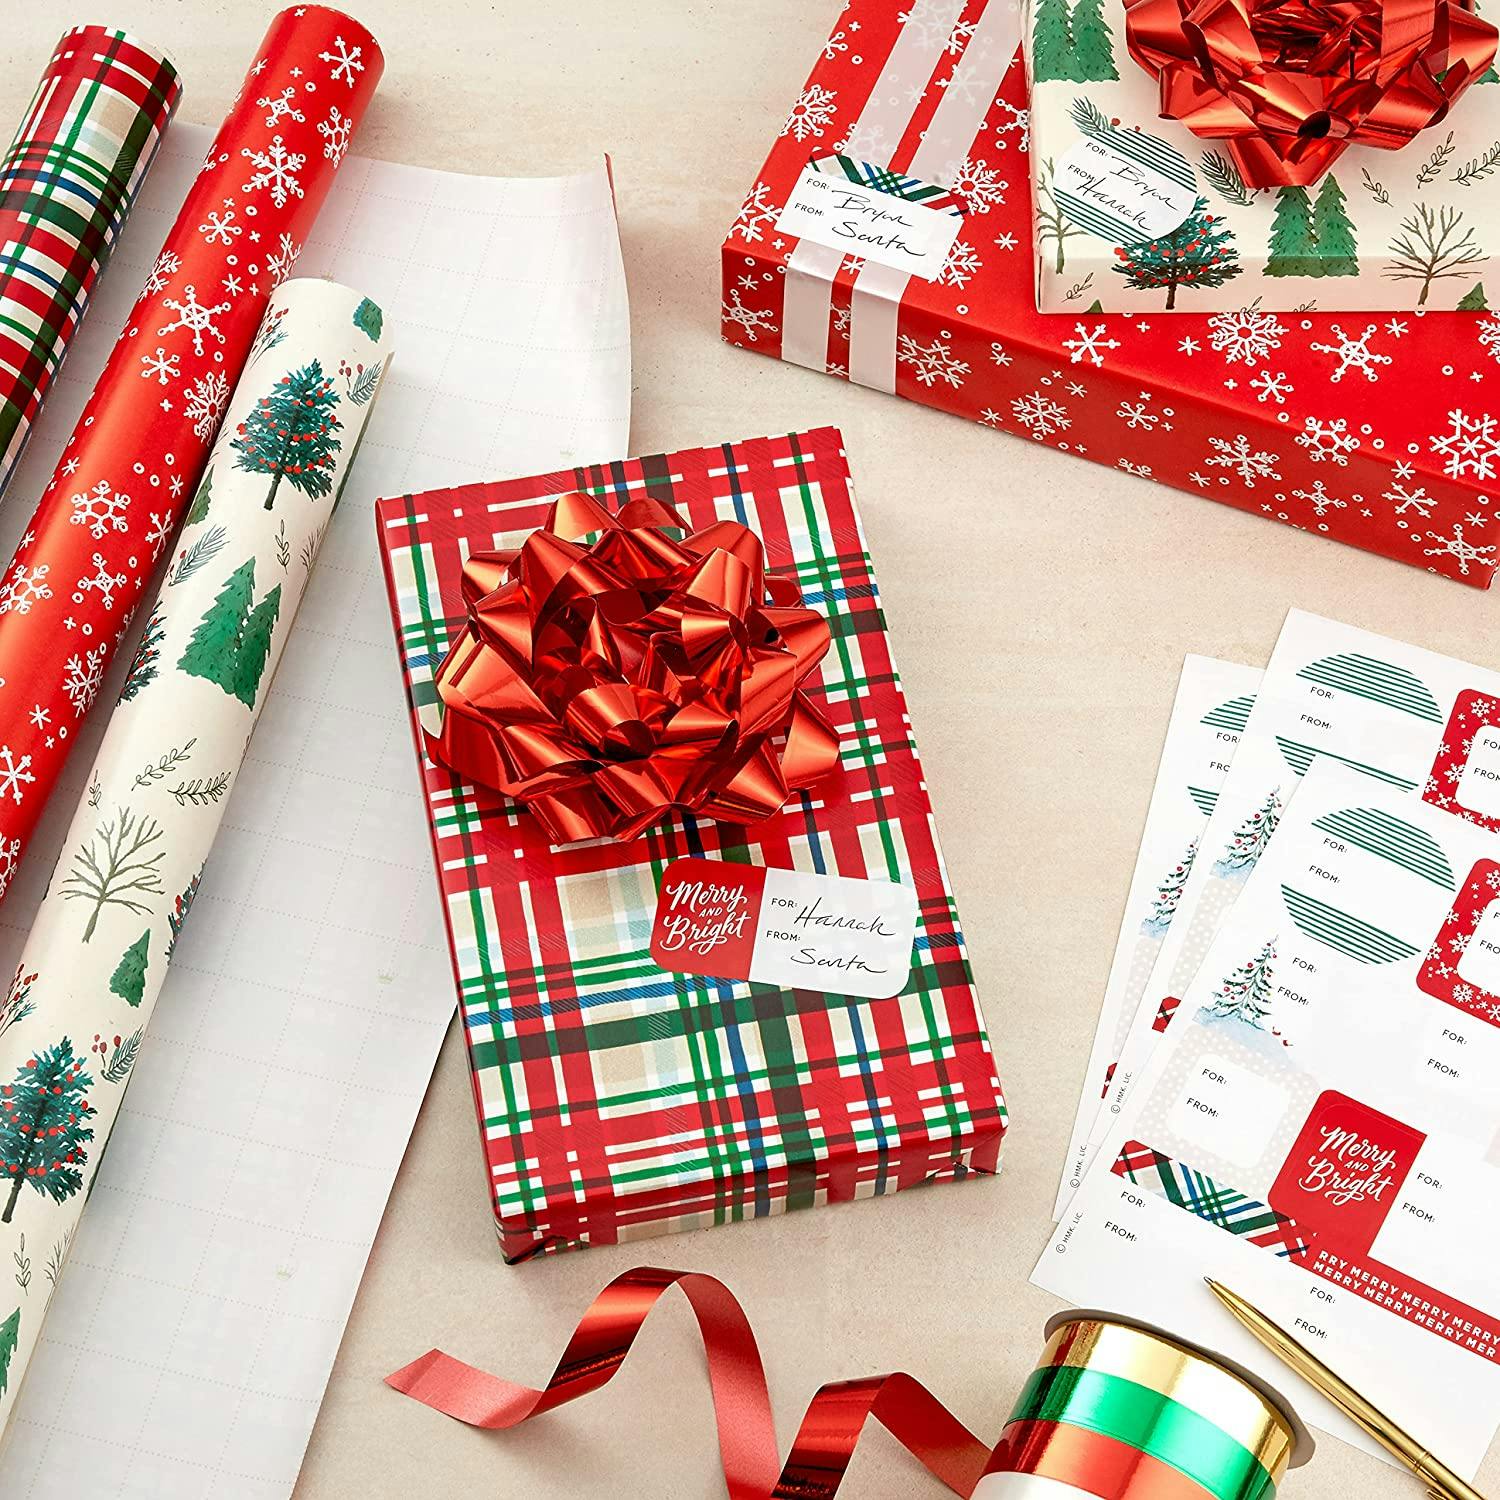 Wrapping Paper Costs: Where to Find Wrapping Paper for Cheap (2022)